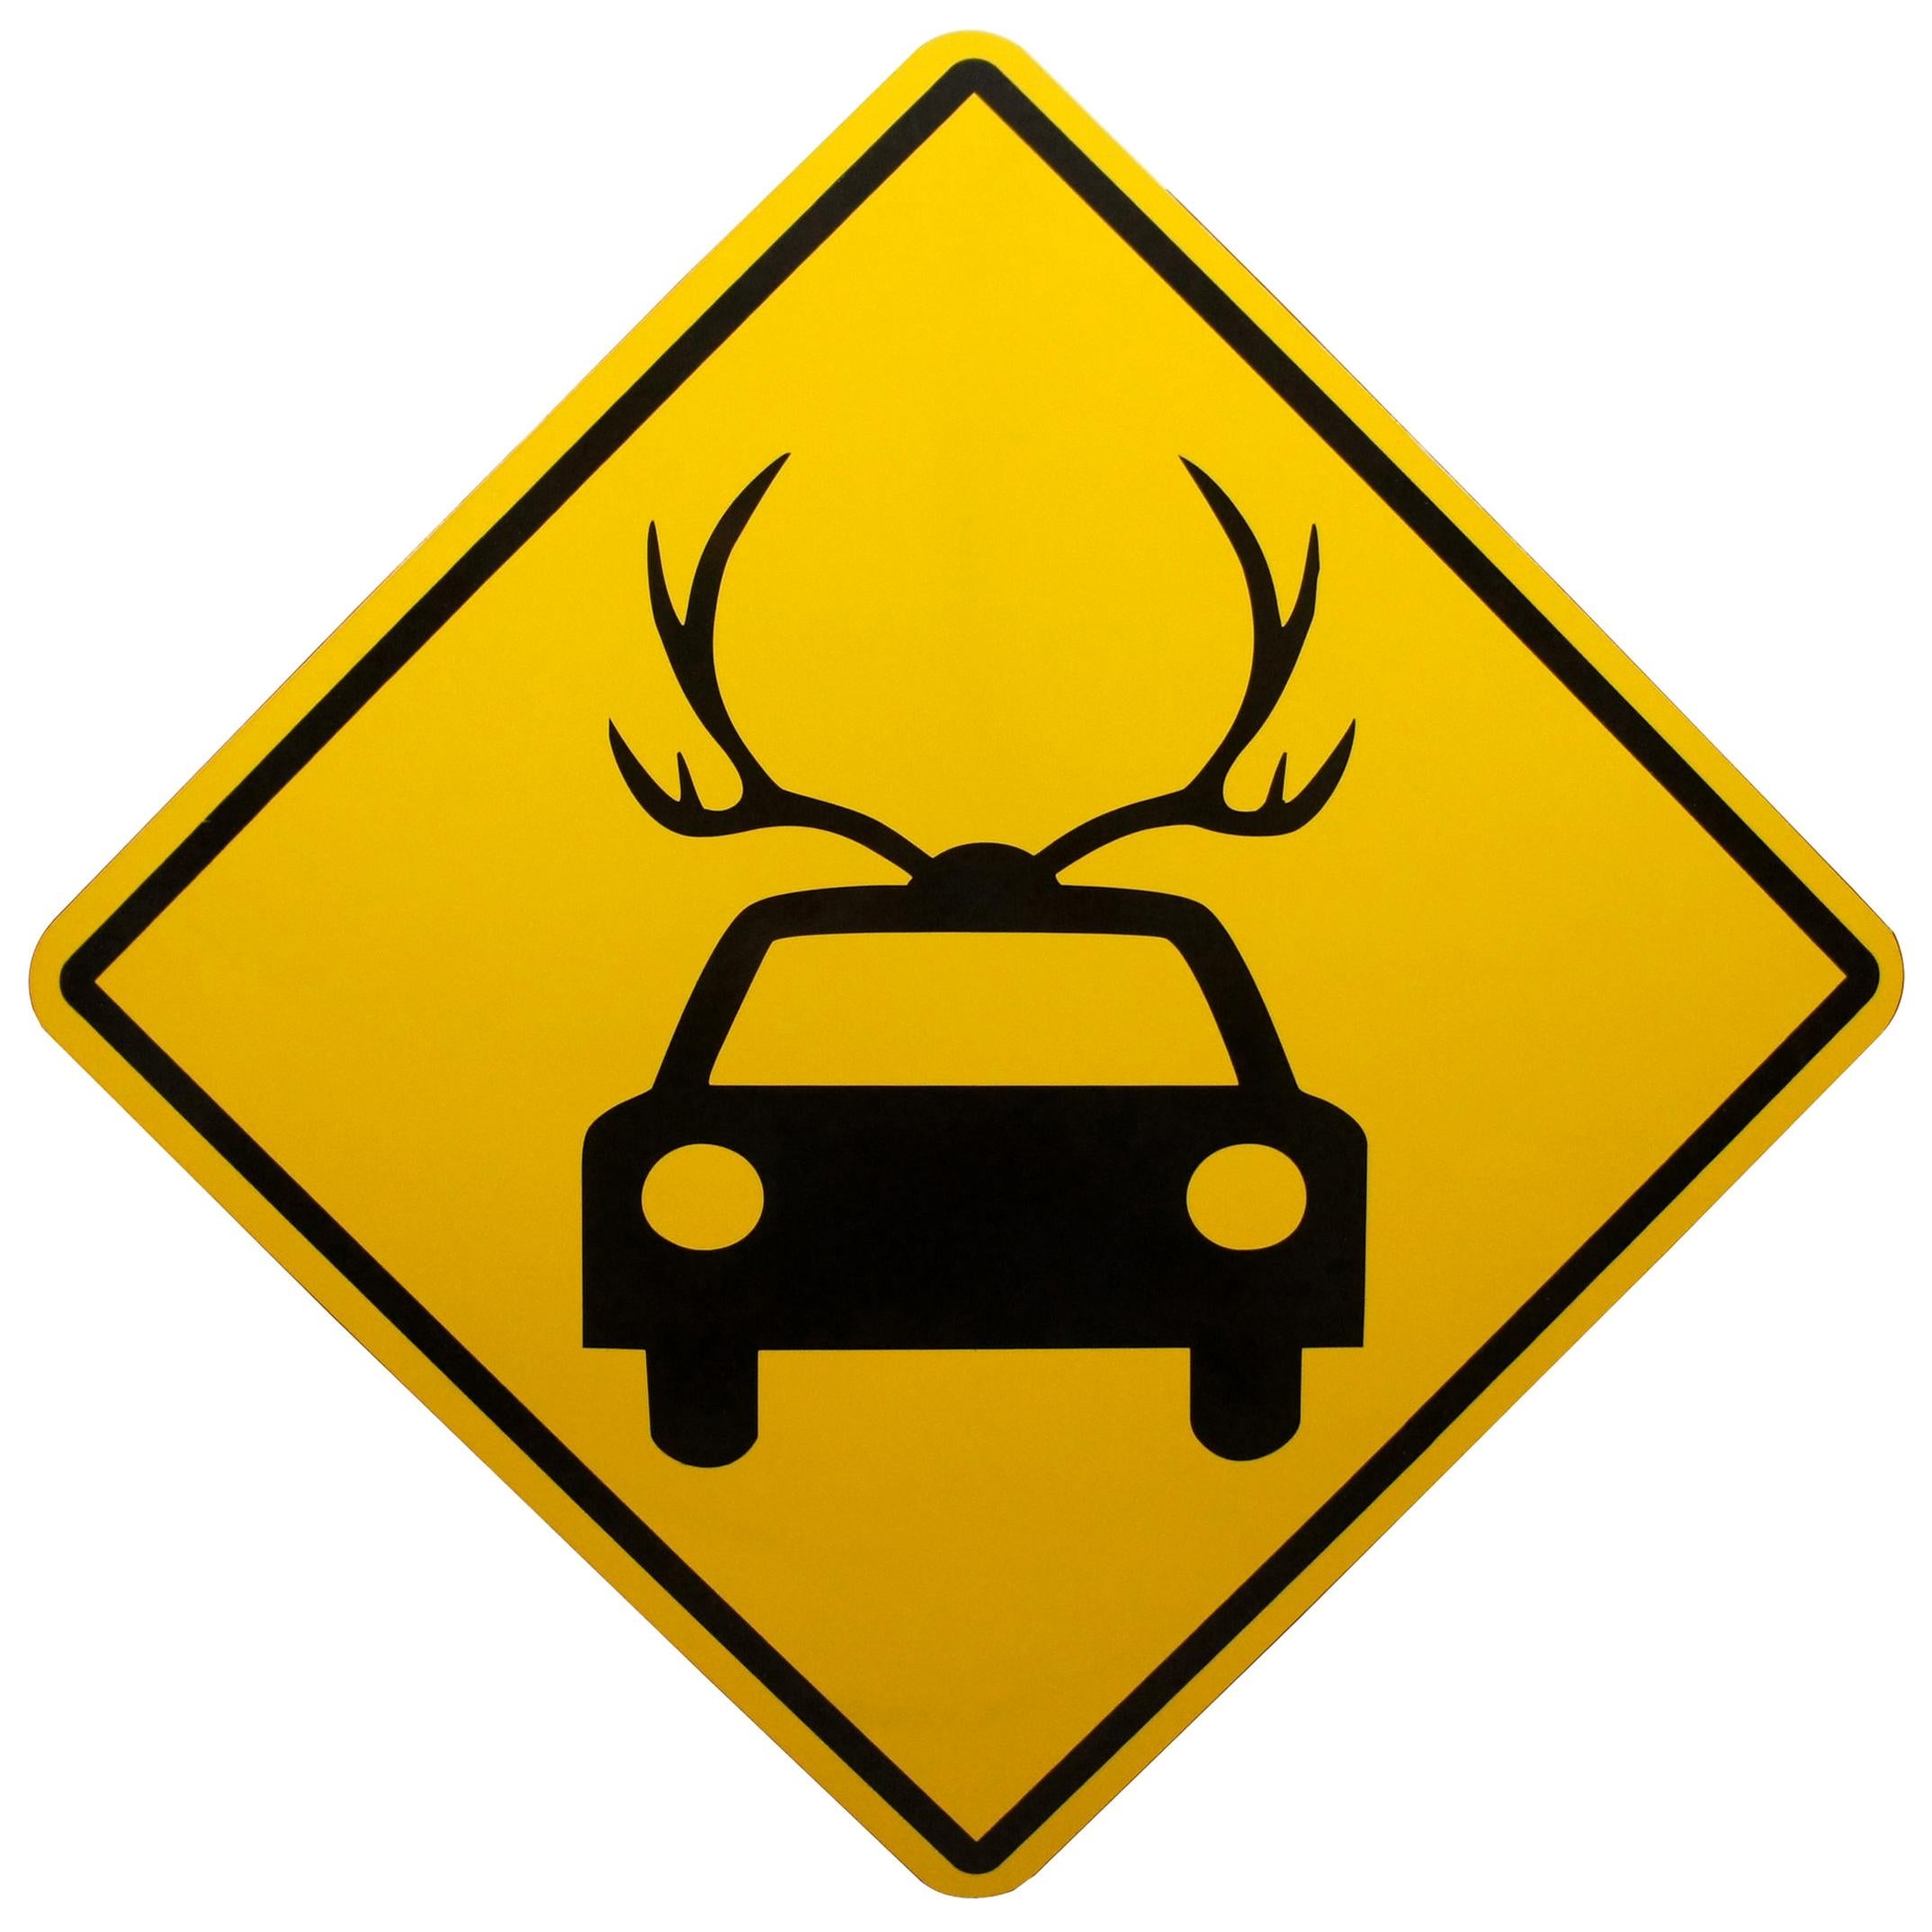 Mary Carothers Signed Untitled Road Sign 1997 Car with Antlers